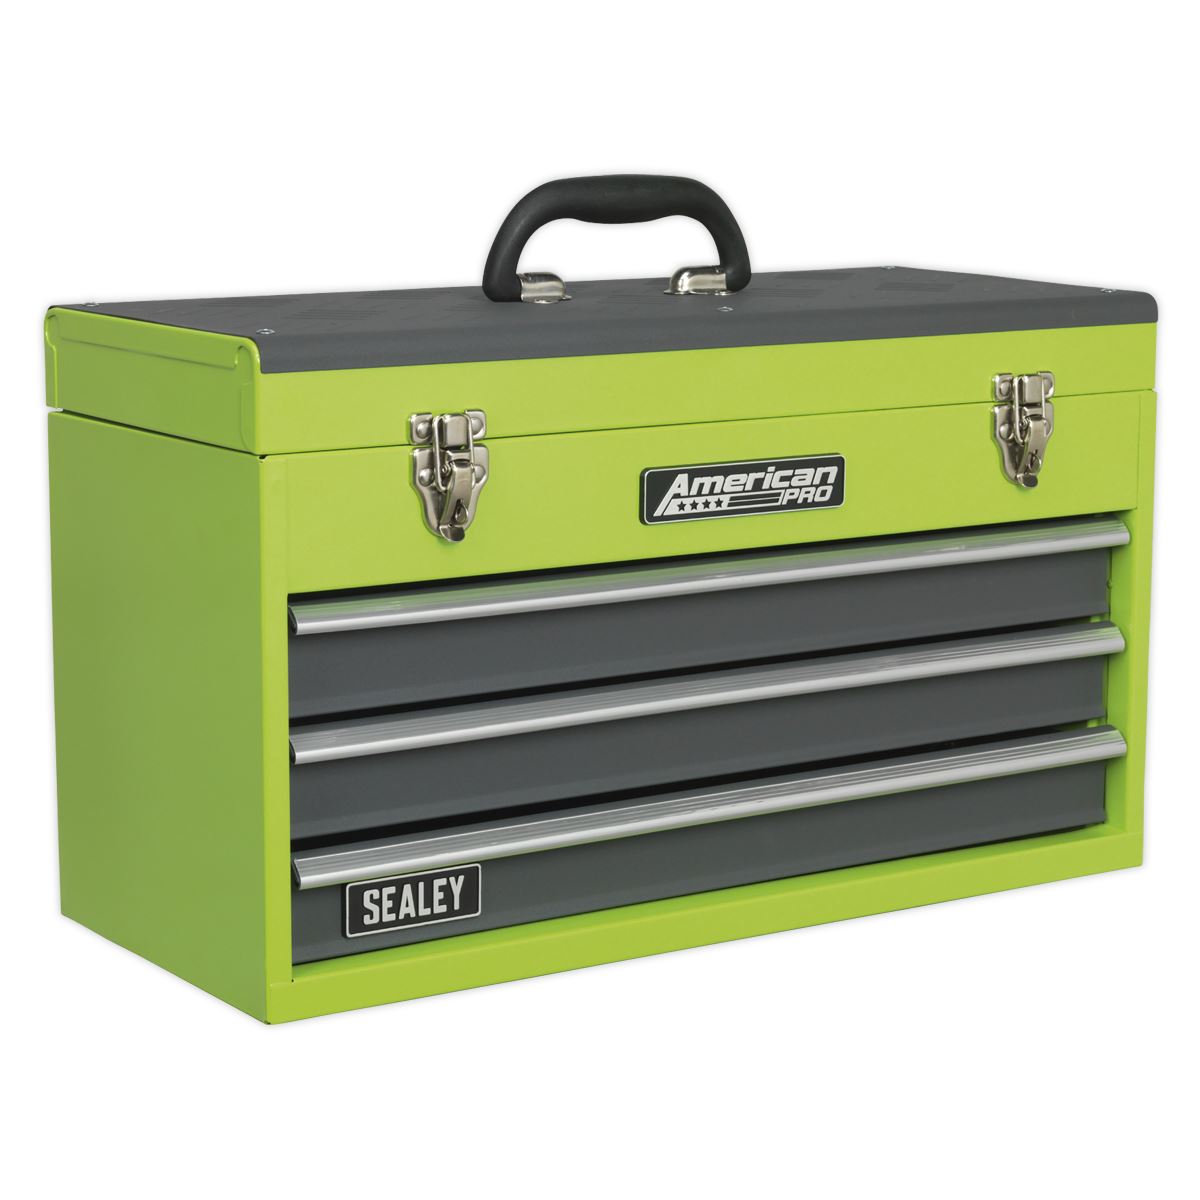 Sealey American Pro Tool Chest 3 Drawer Portable with Ball-Bearing Slides - Green/Grey